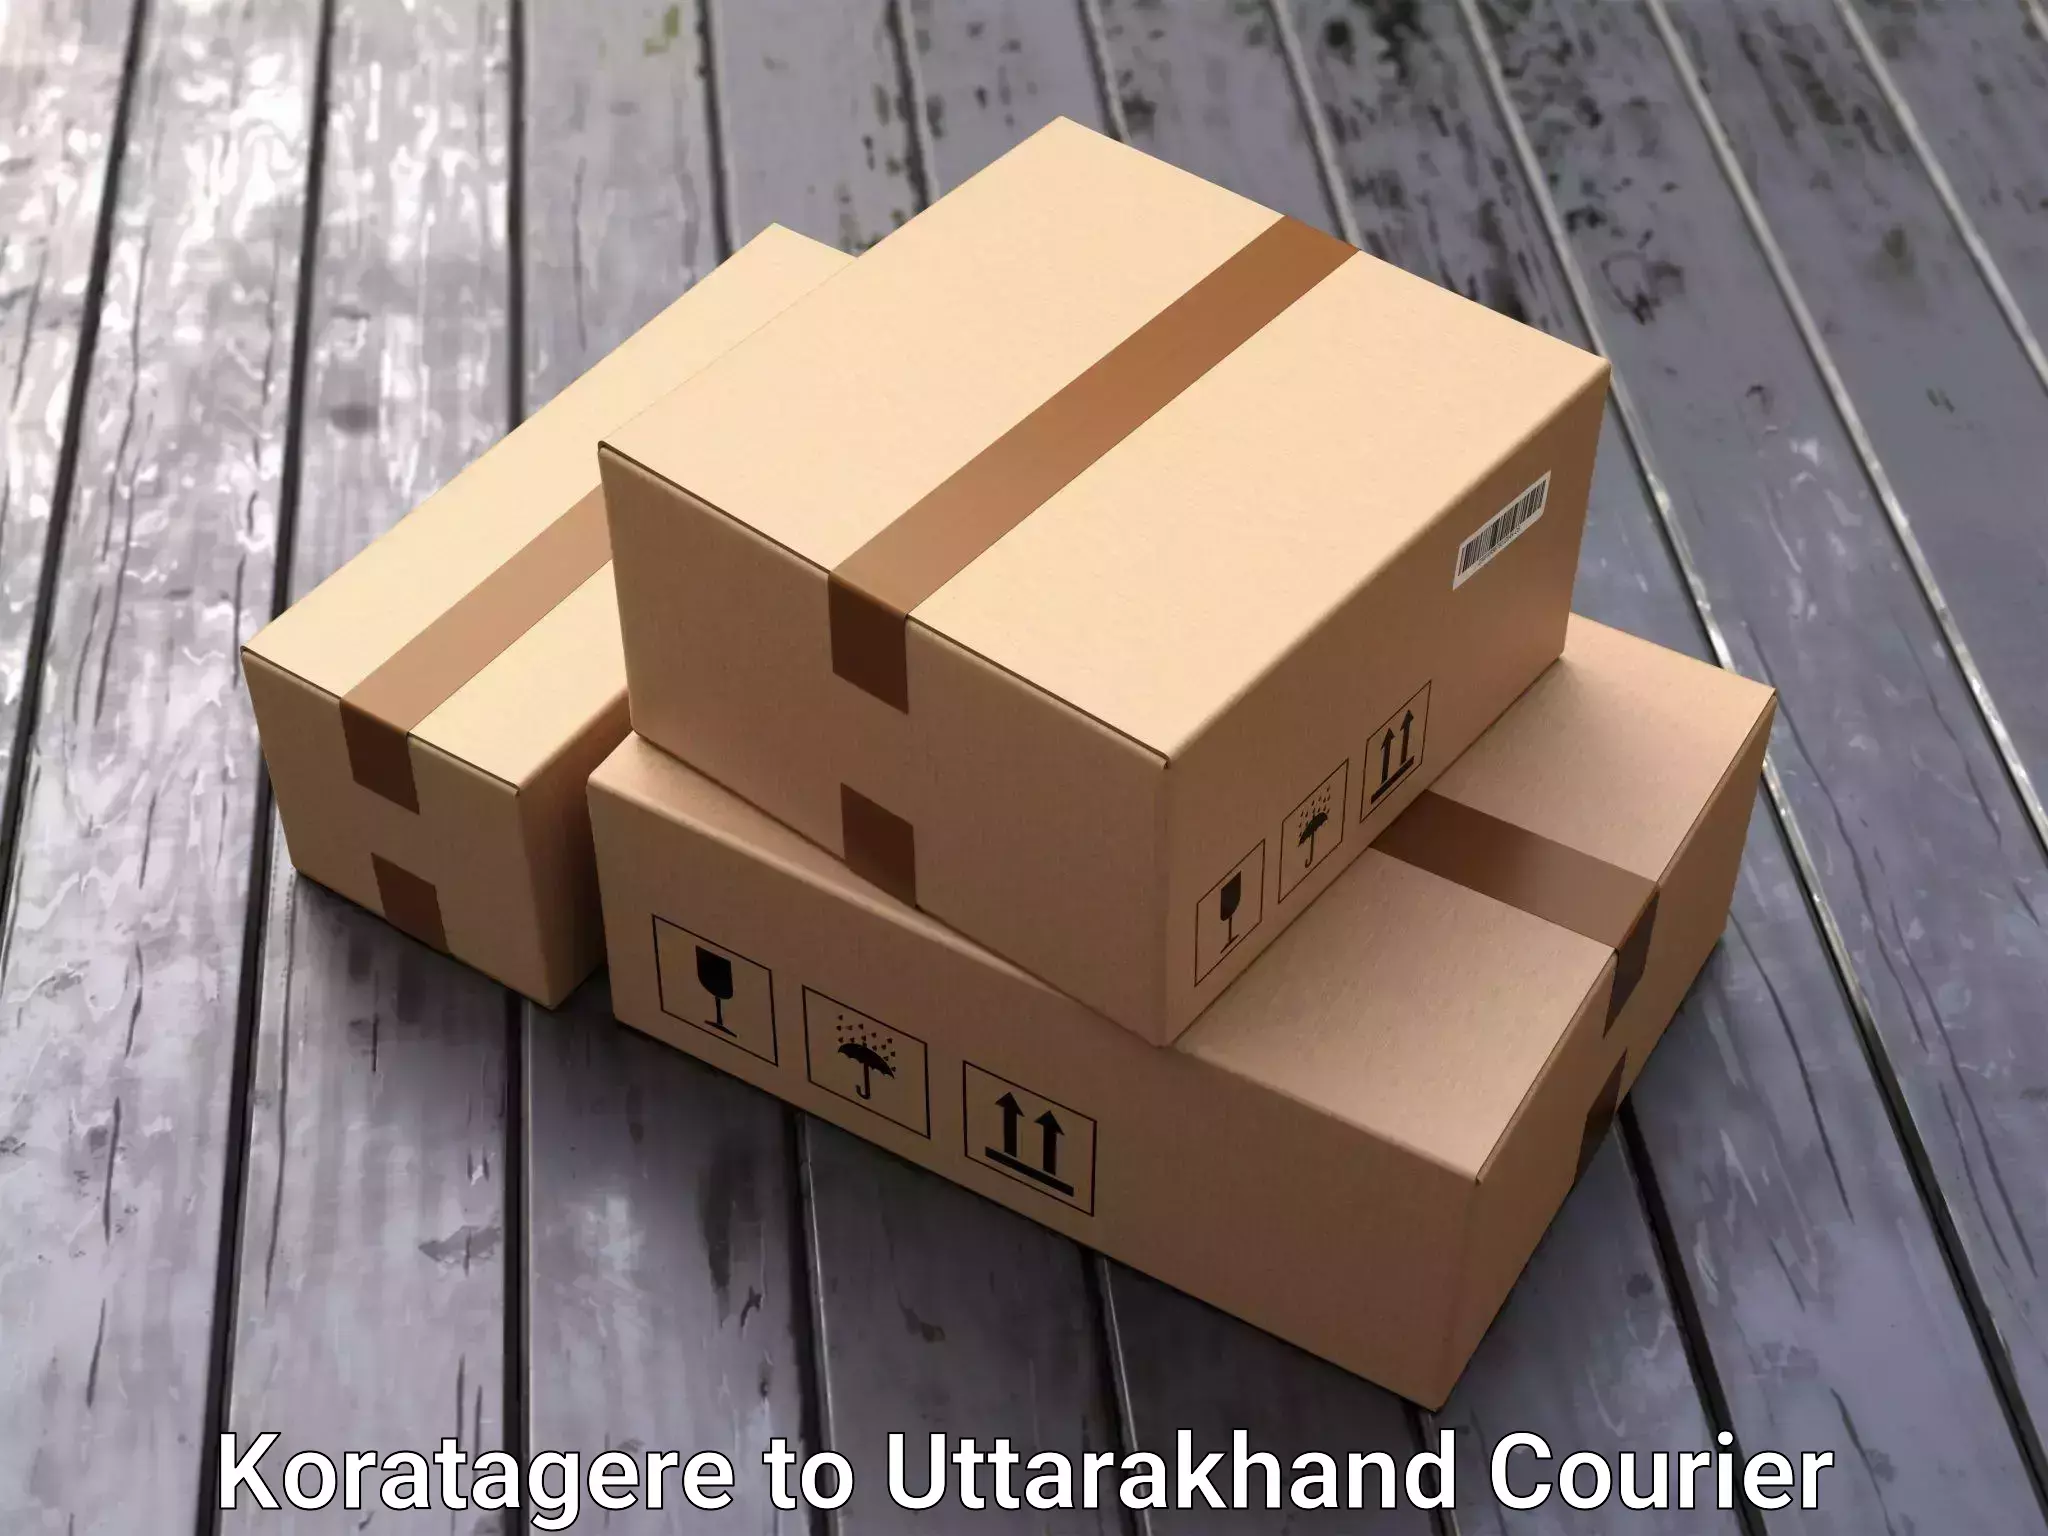 Full-service relocation in Koratagere to Dwarahat